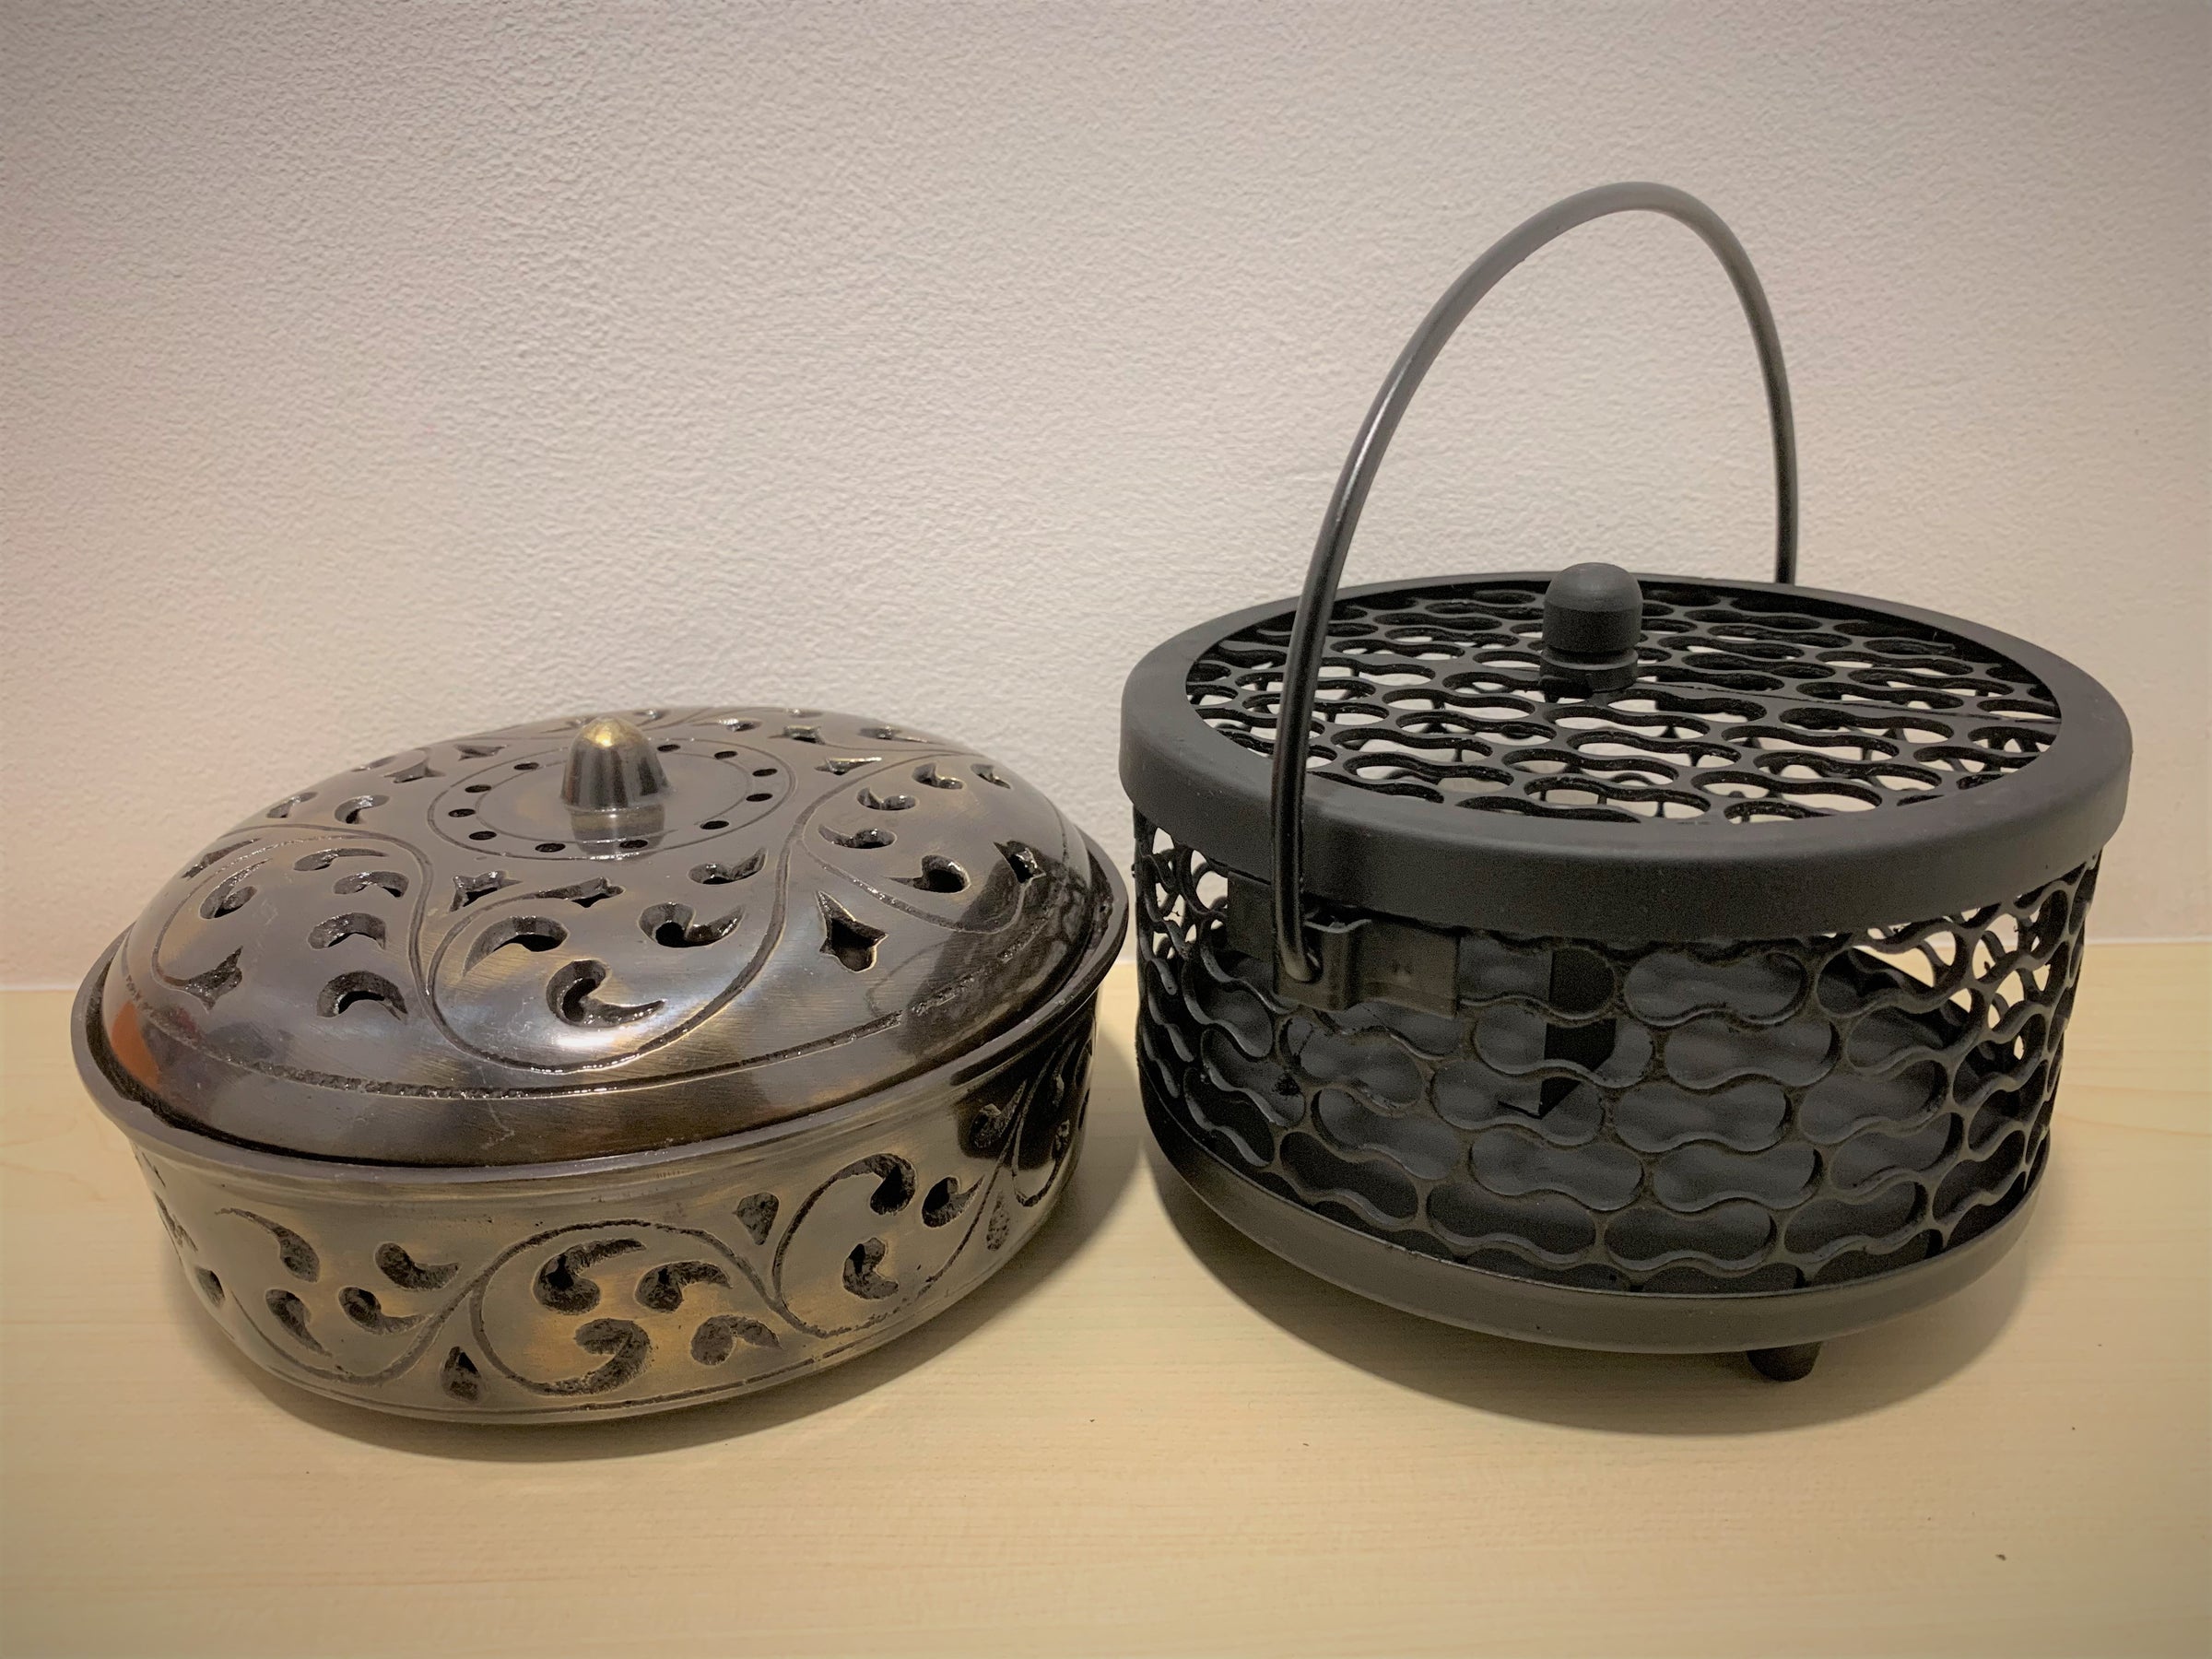 Mosquito coil holders